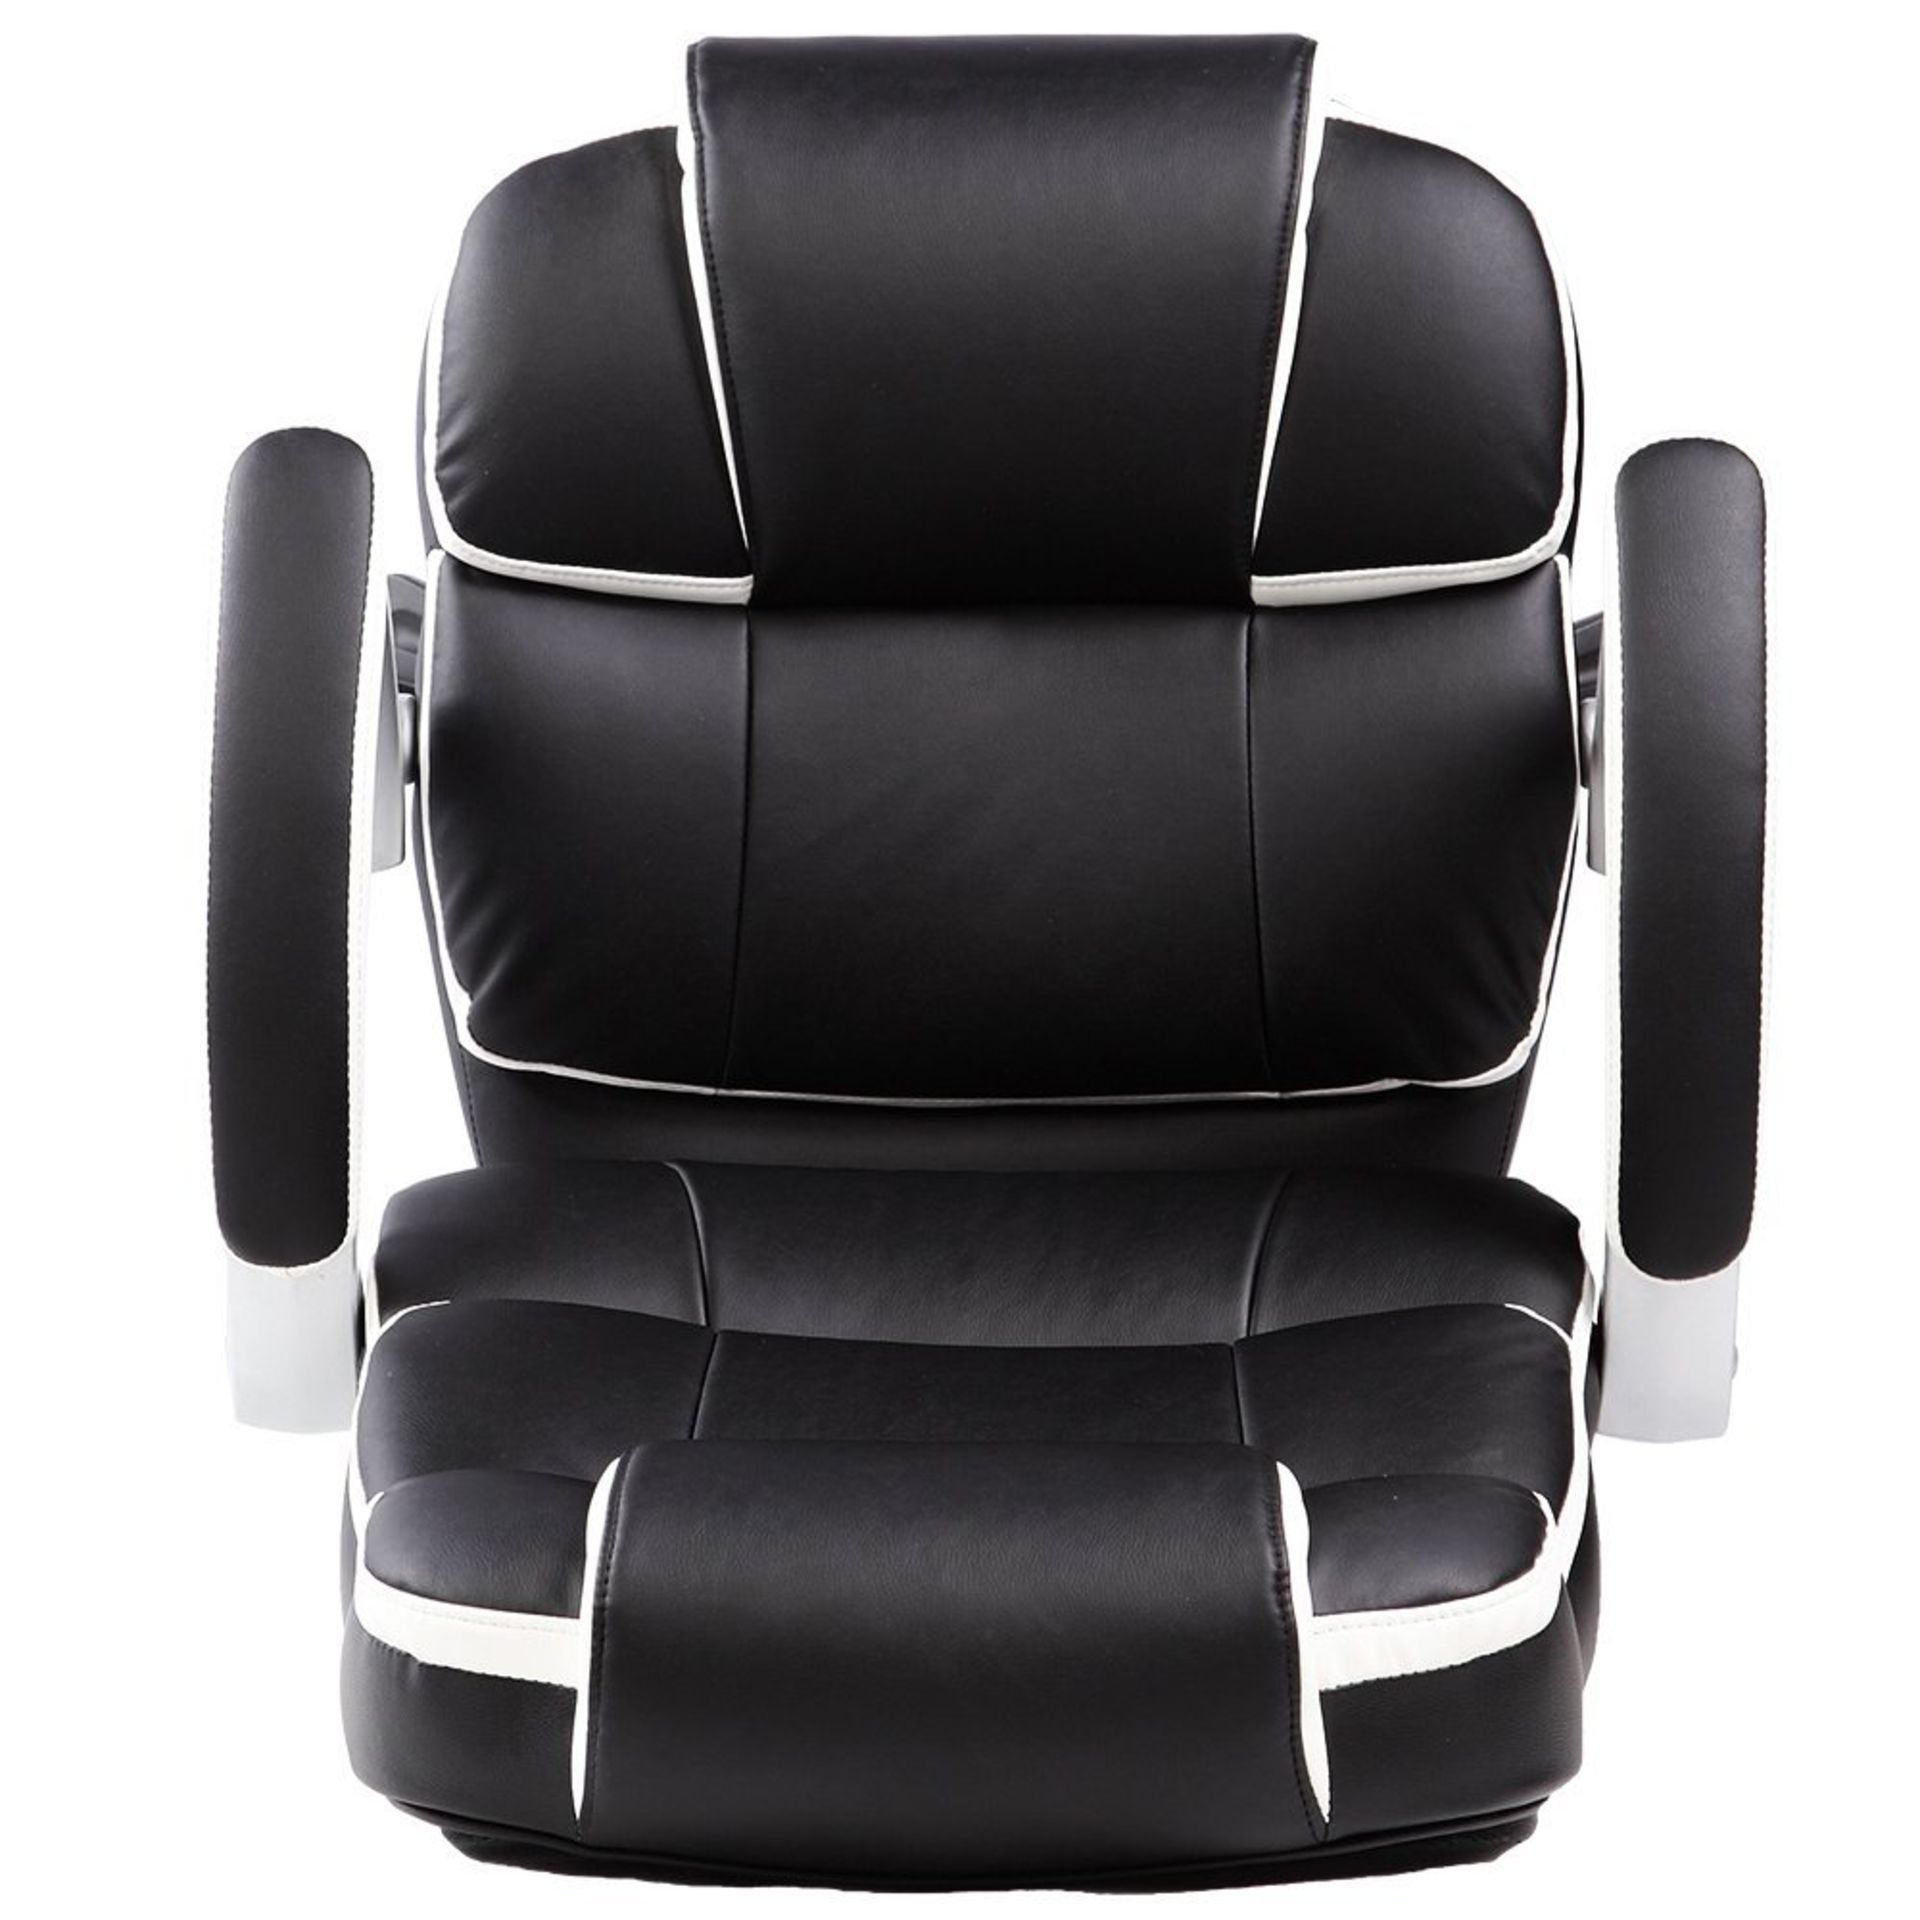 (SK94) Luxury Designer Computer Office Chair - Black with White Accents Our renowned high qu... - Image 2 of 2